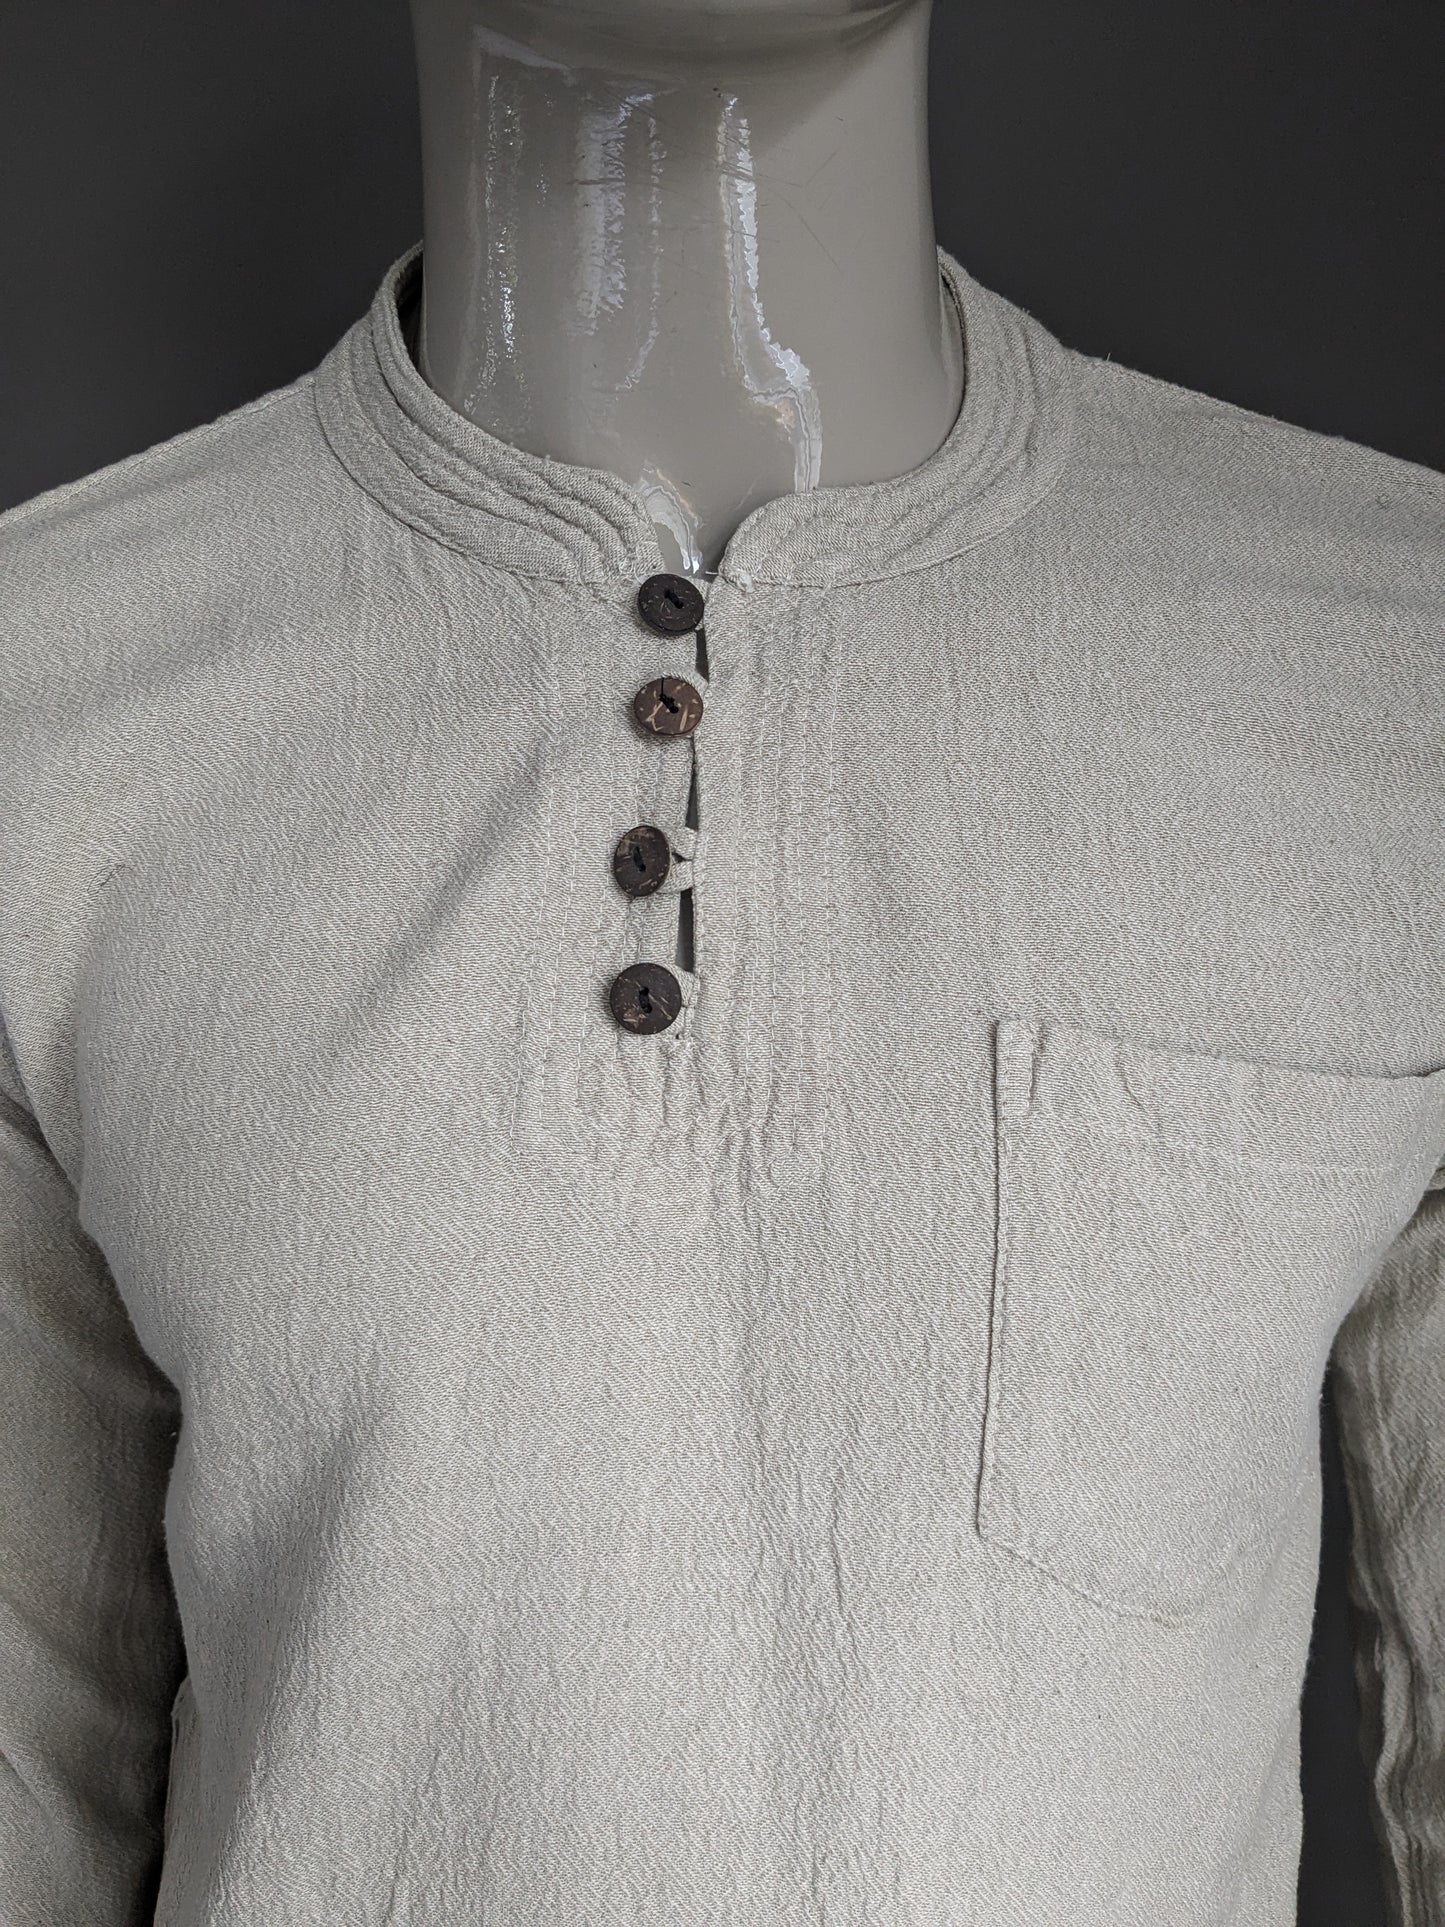 Vintage guru shirt shirt with mao / farmers and raised collar with 1 bag. Beige motif. Size M.